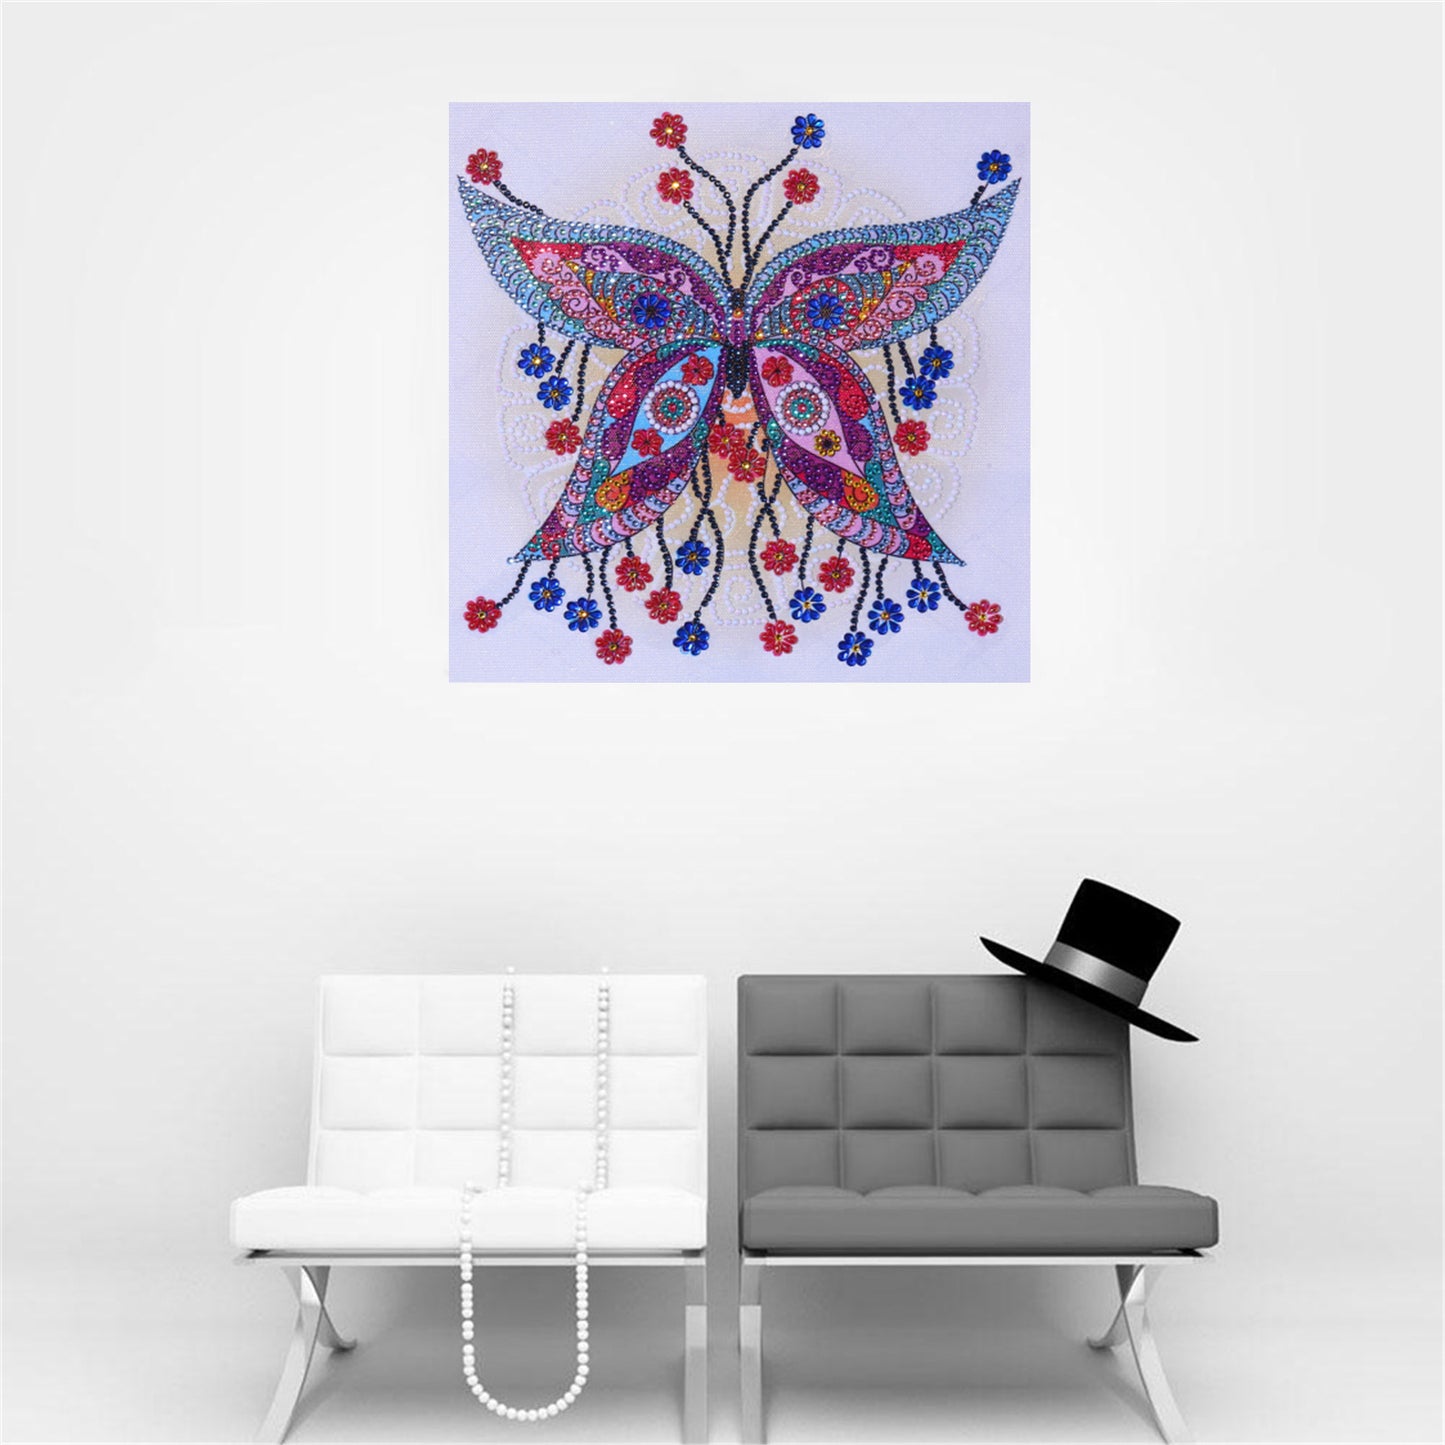 Shinning Butterfly Diamond Paint Kit 5D DIY Mosaic Picture Crafts Art Hobby Diamond Embroidery Cross Stitch Home Decor